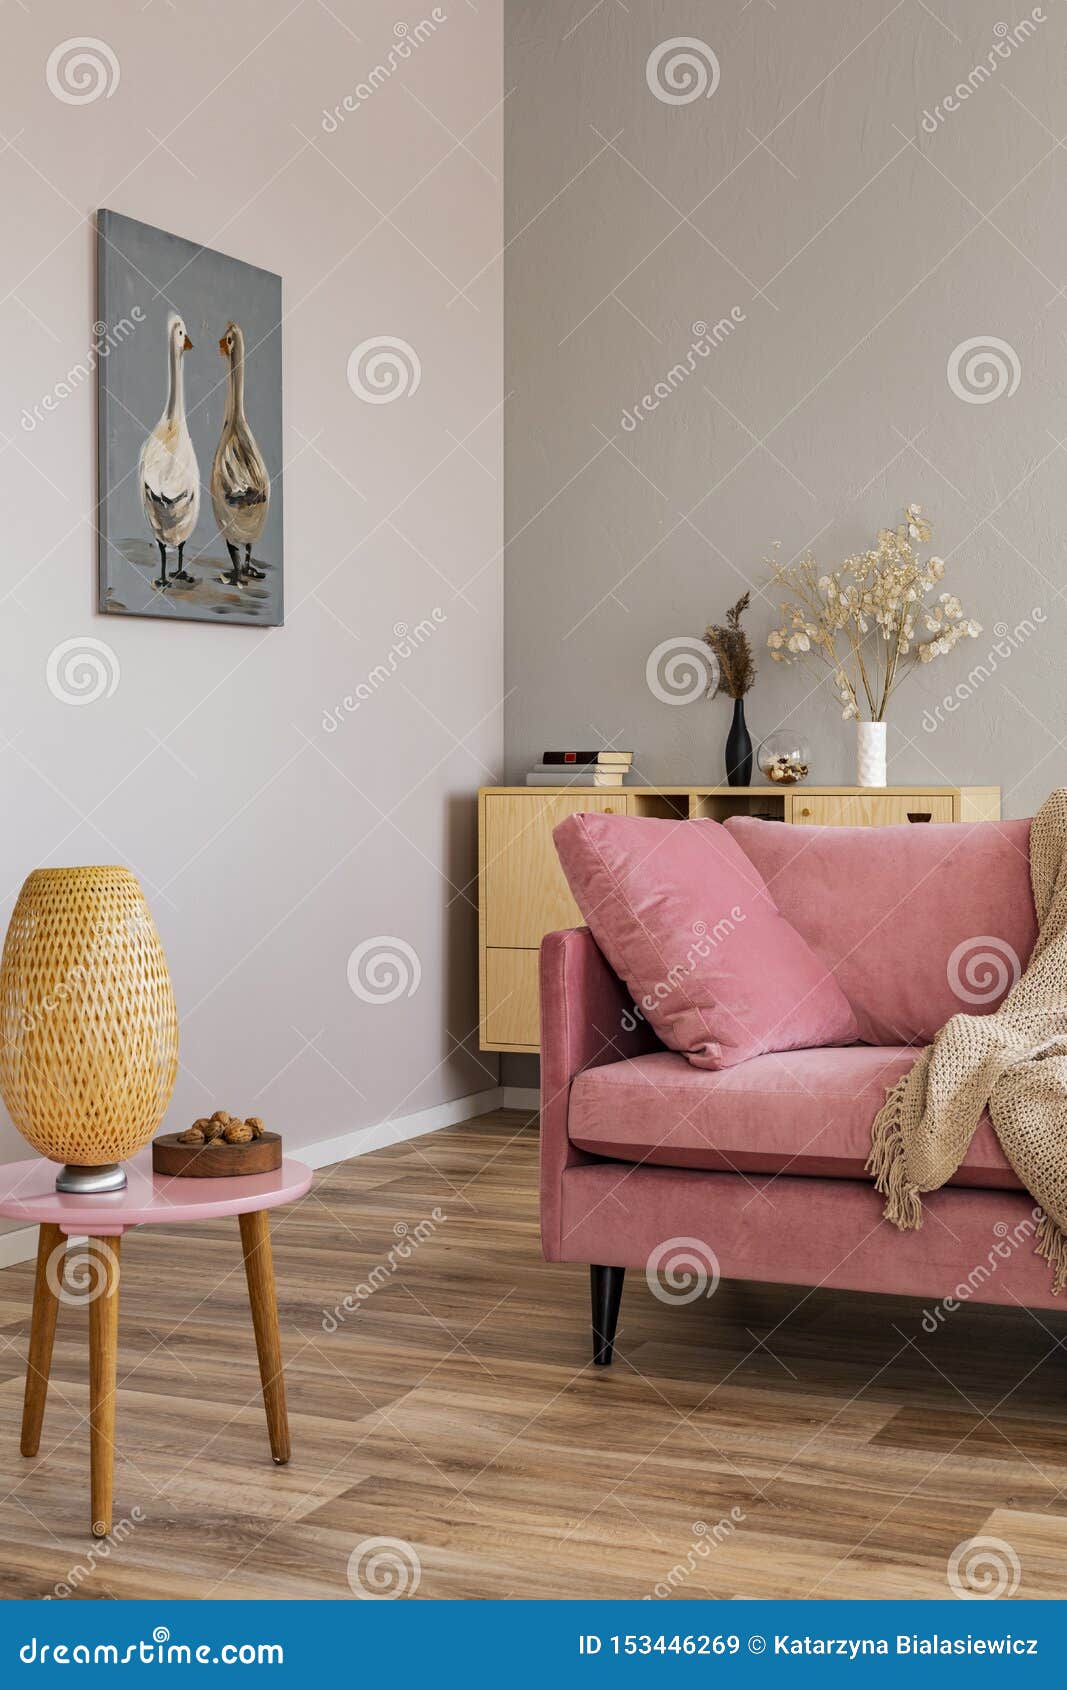 living room in neutral colors with accents of pink and wood